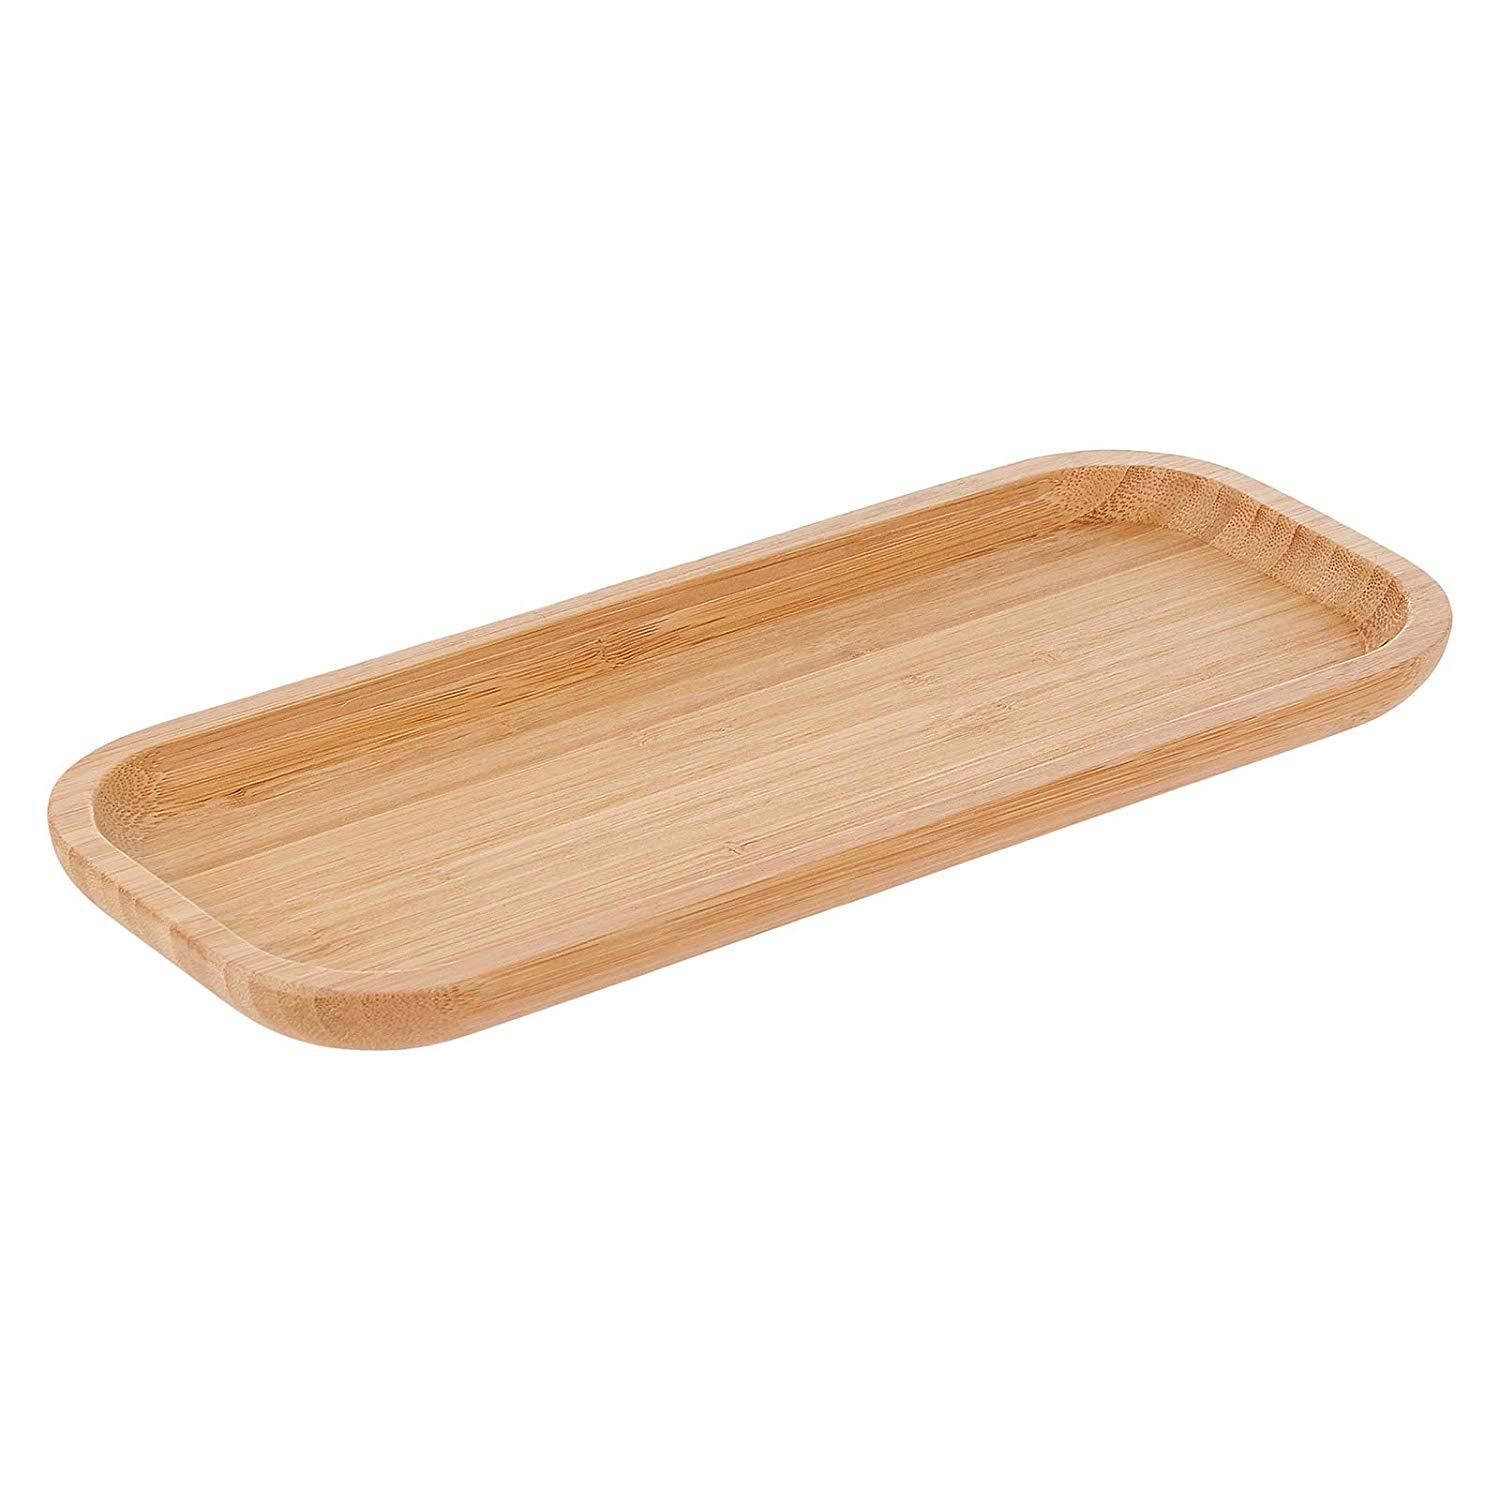 Wooden Rectangle Serving Trays, 36 x 15 cm